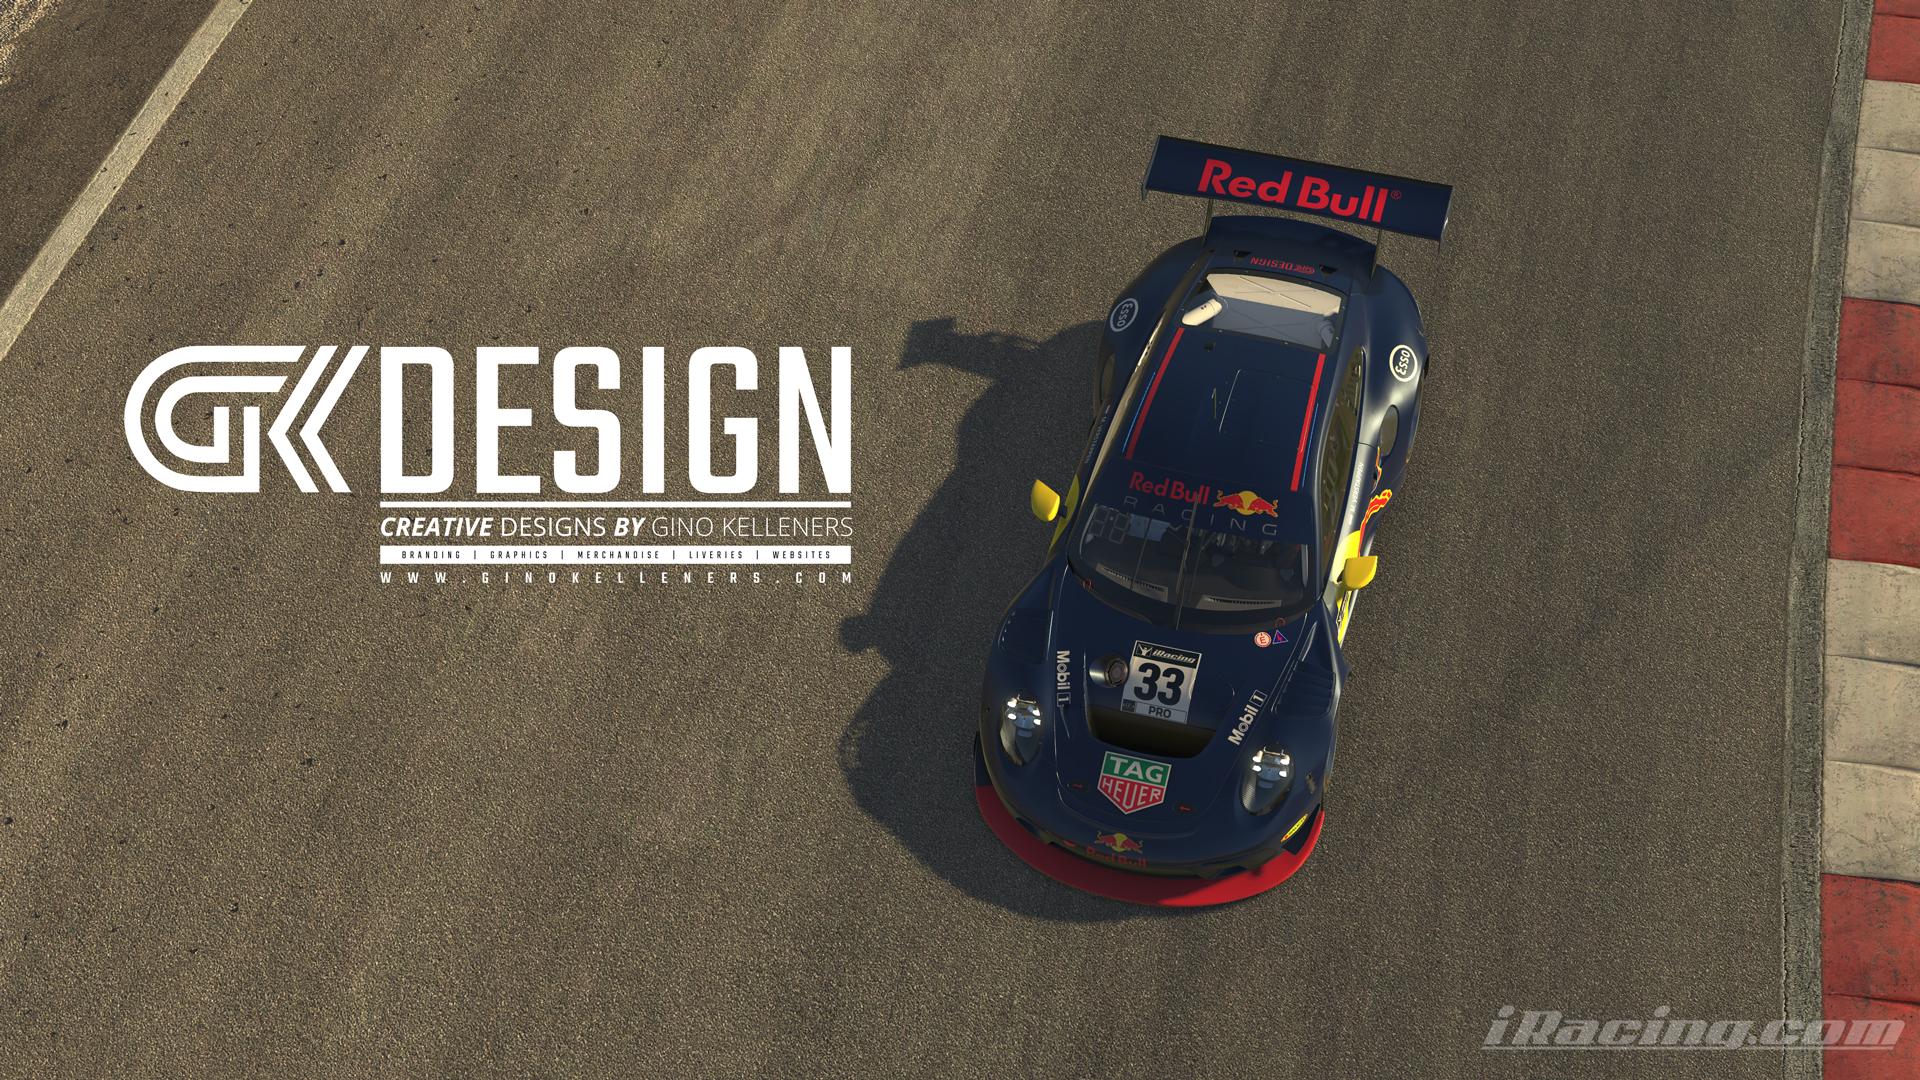 Preview of Red Bull Racing F1 Max Verstappen 33 Livery - Porsche 911 GT3 R  by Gino Kelleners